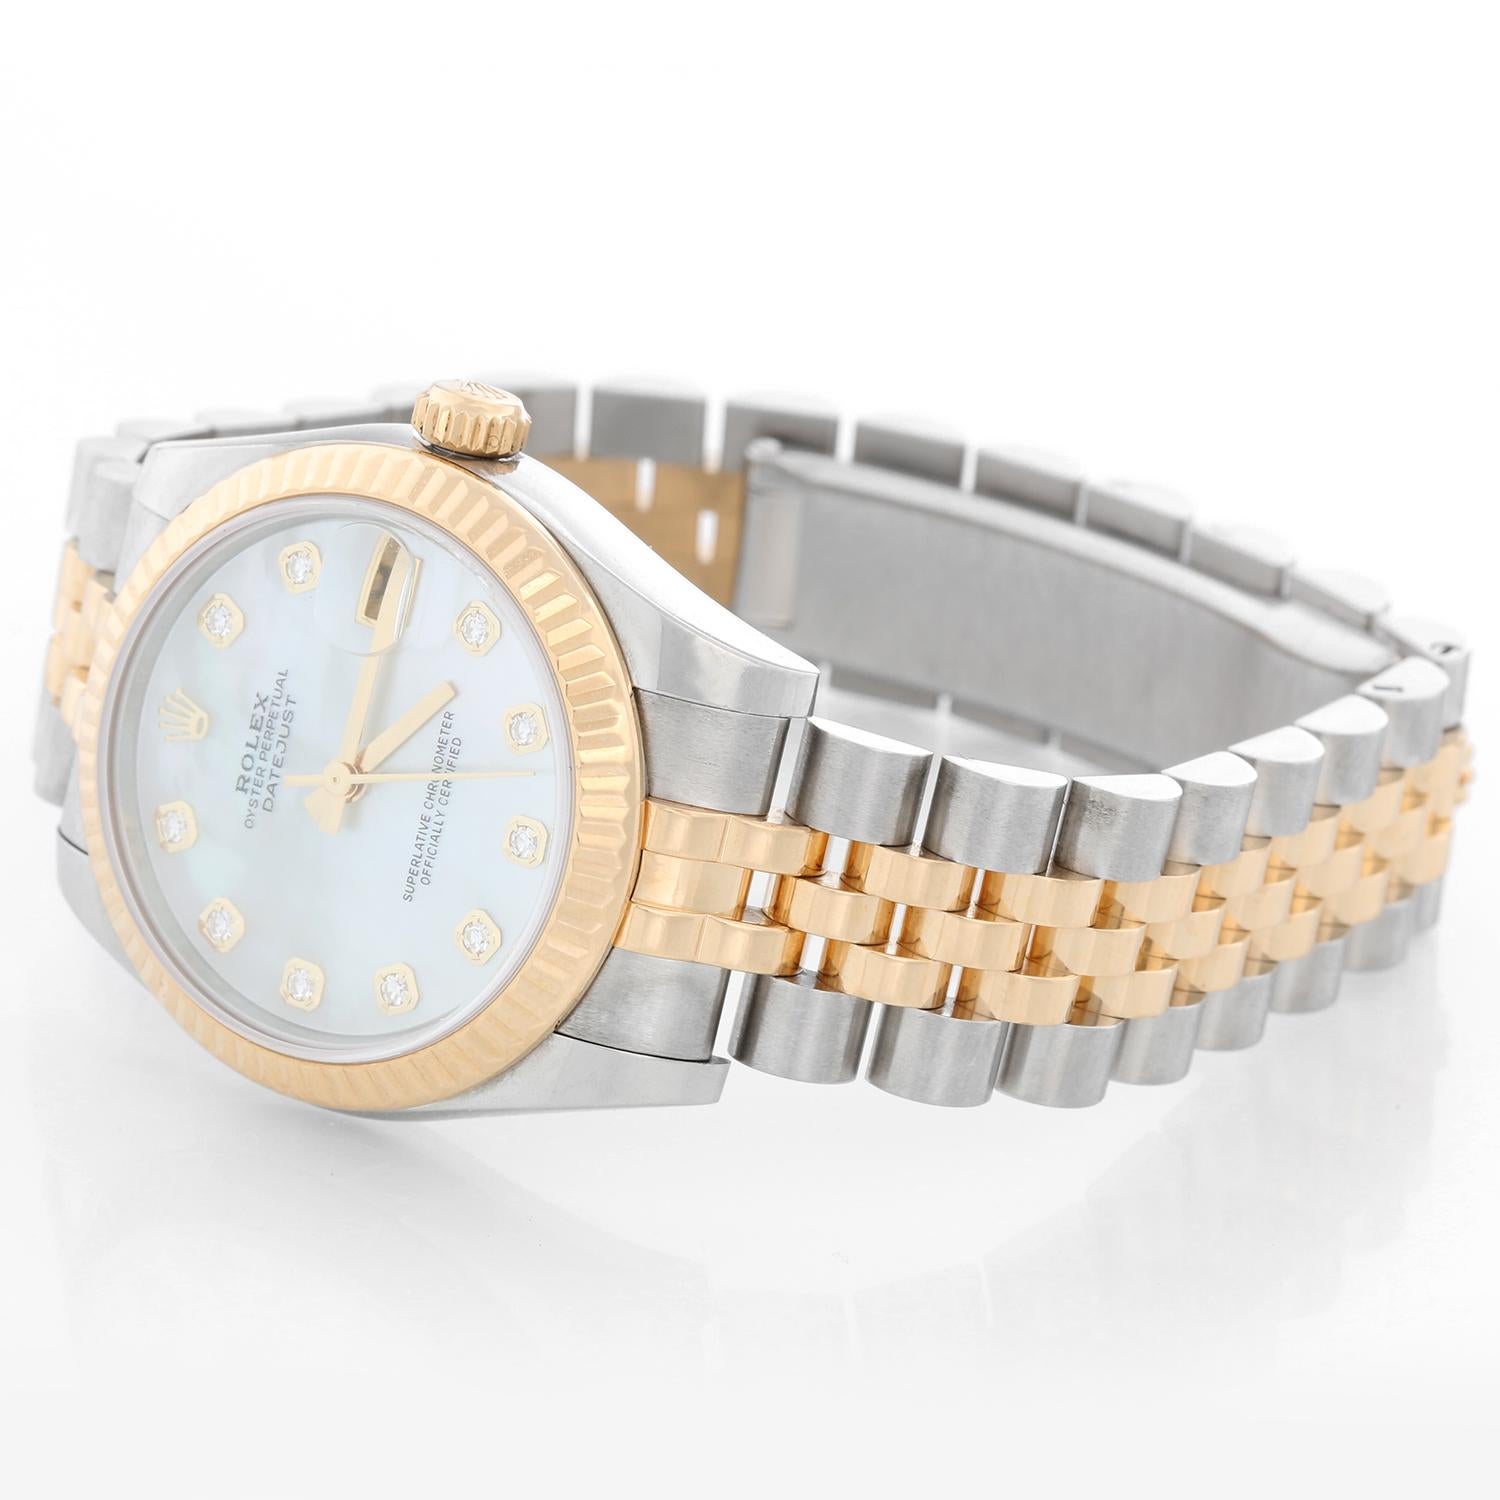 Rolex Datejust Midsize 2-Tone Watch 178273 - Automatic winding; 31 jewel; sapphire crystal. Stainless steel case with 18k yellow gold fluted bezel  (31mm diameter). Factory Mother of Pearl dial with diamond hour markers. Stainless steel and gold